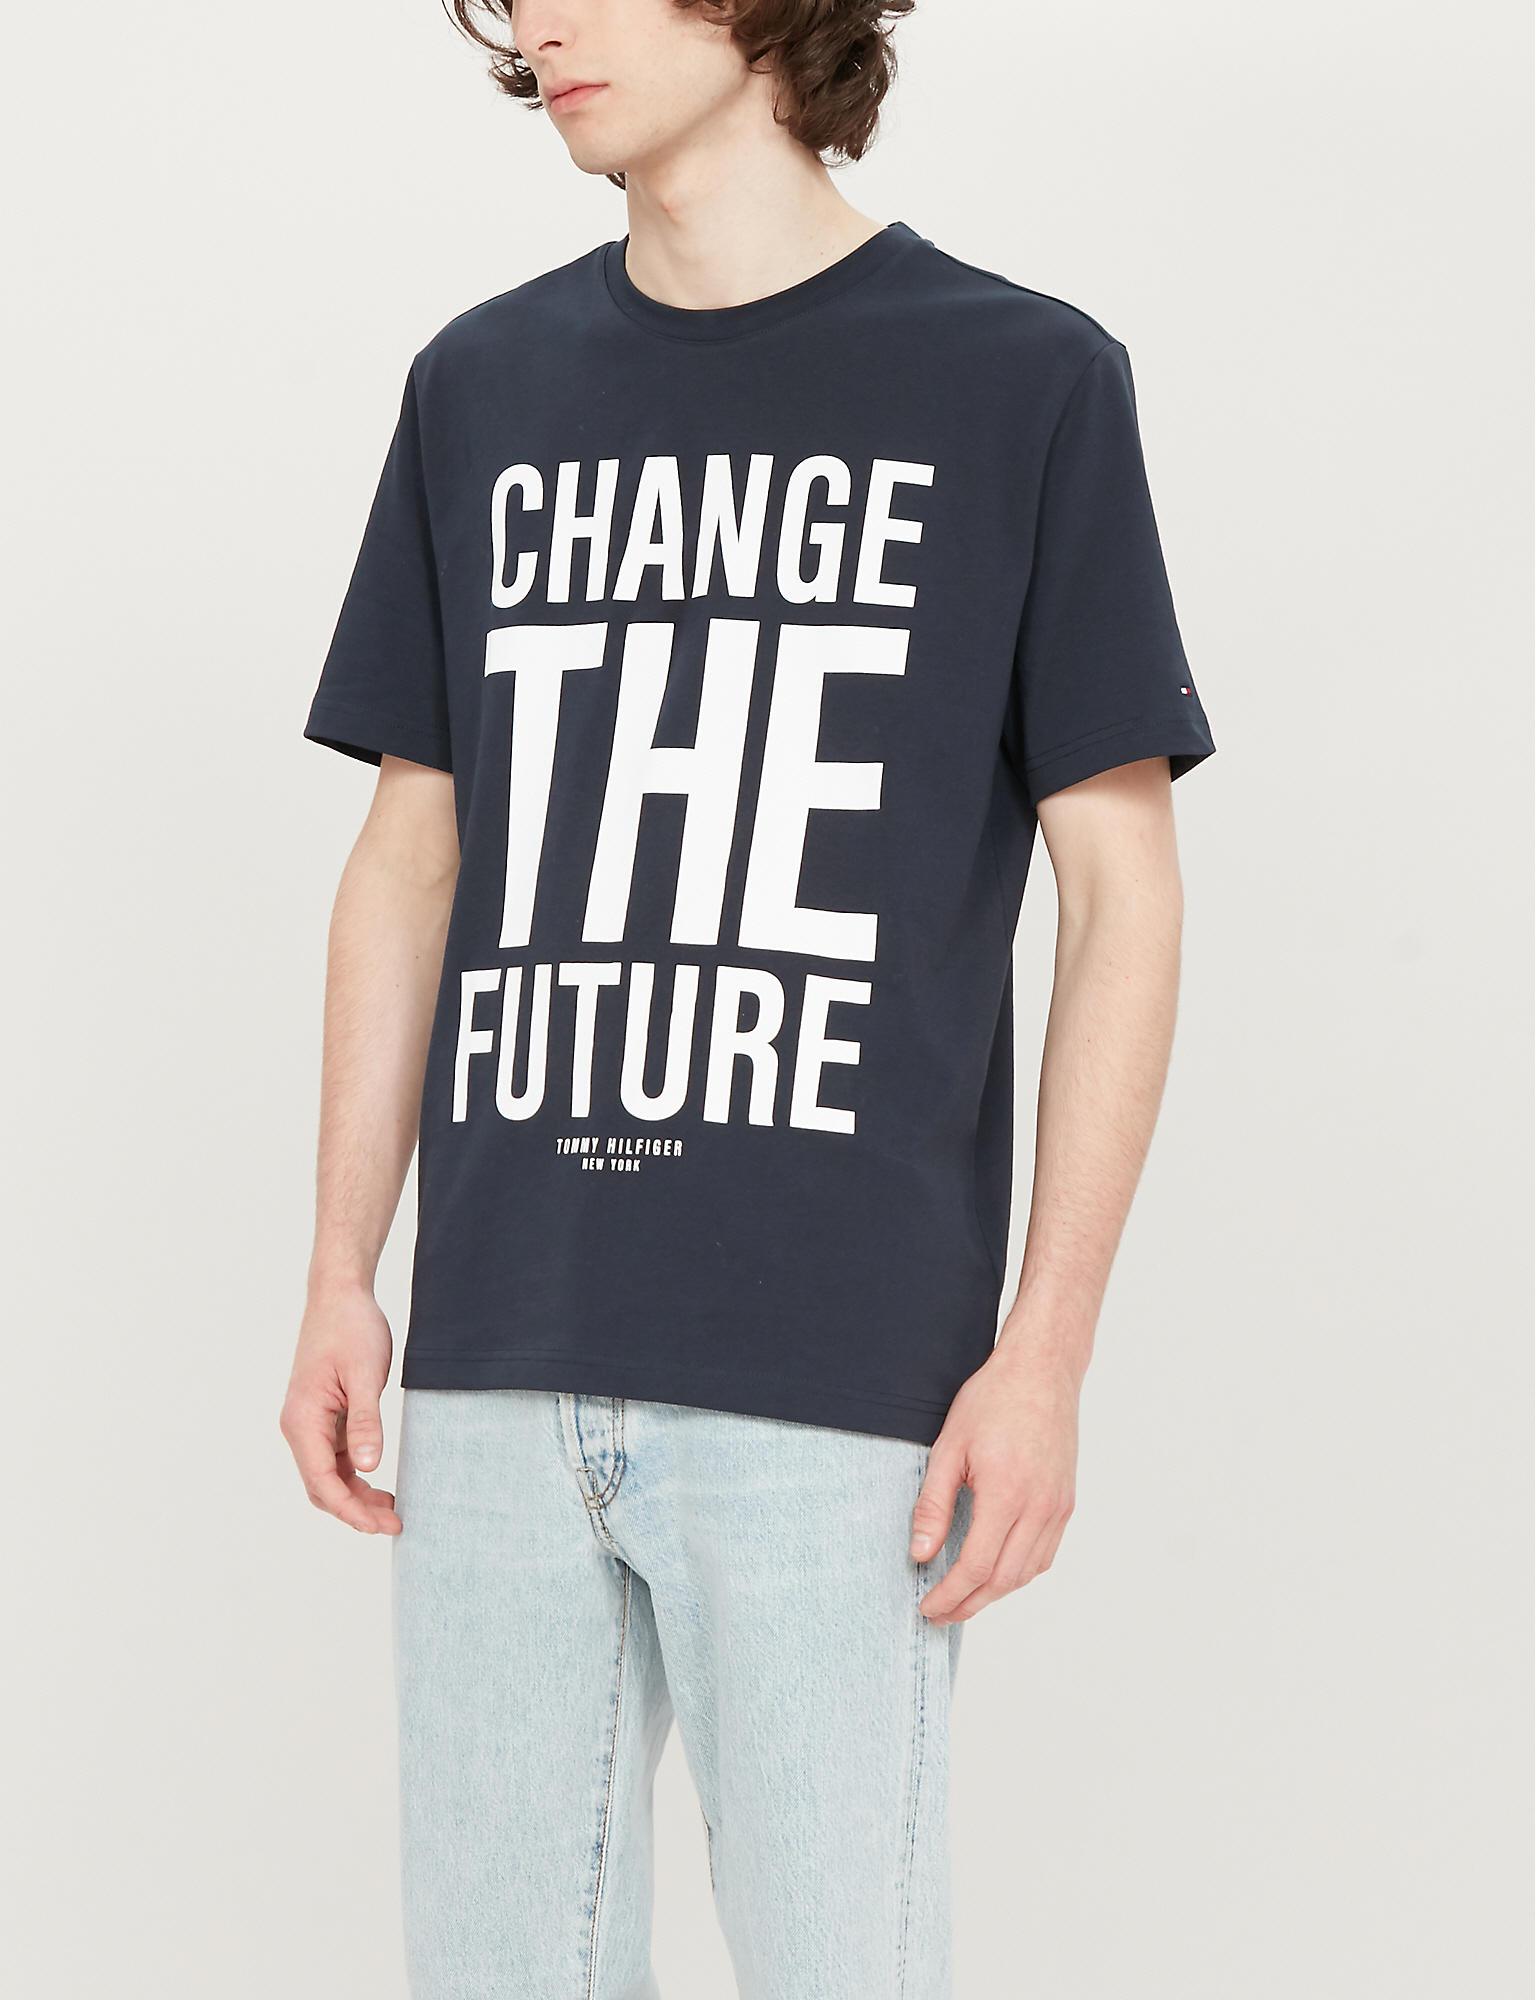 Situation Perversion slogan Tommy Hilfiger Change The Future Slogan Cotton-jersey T-shirt in Navy  (Blue) for Men - Lyst